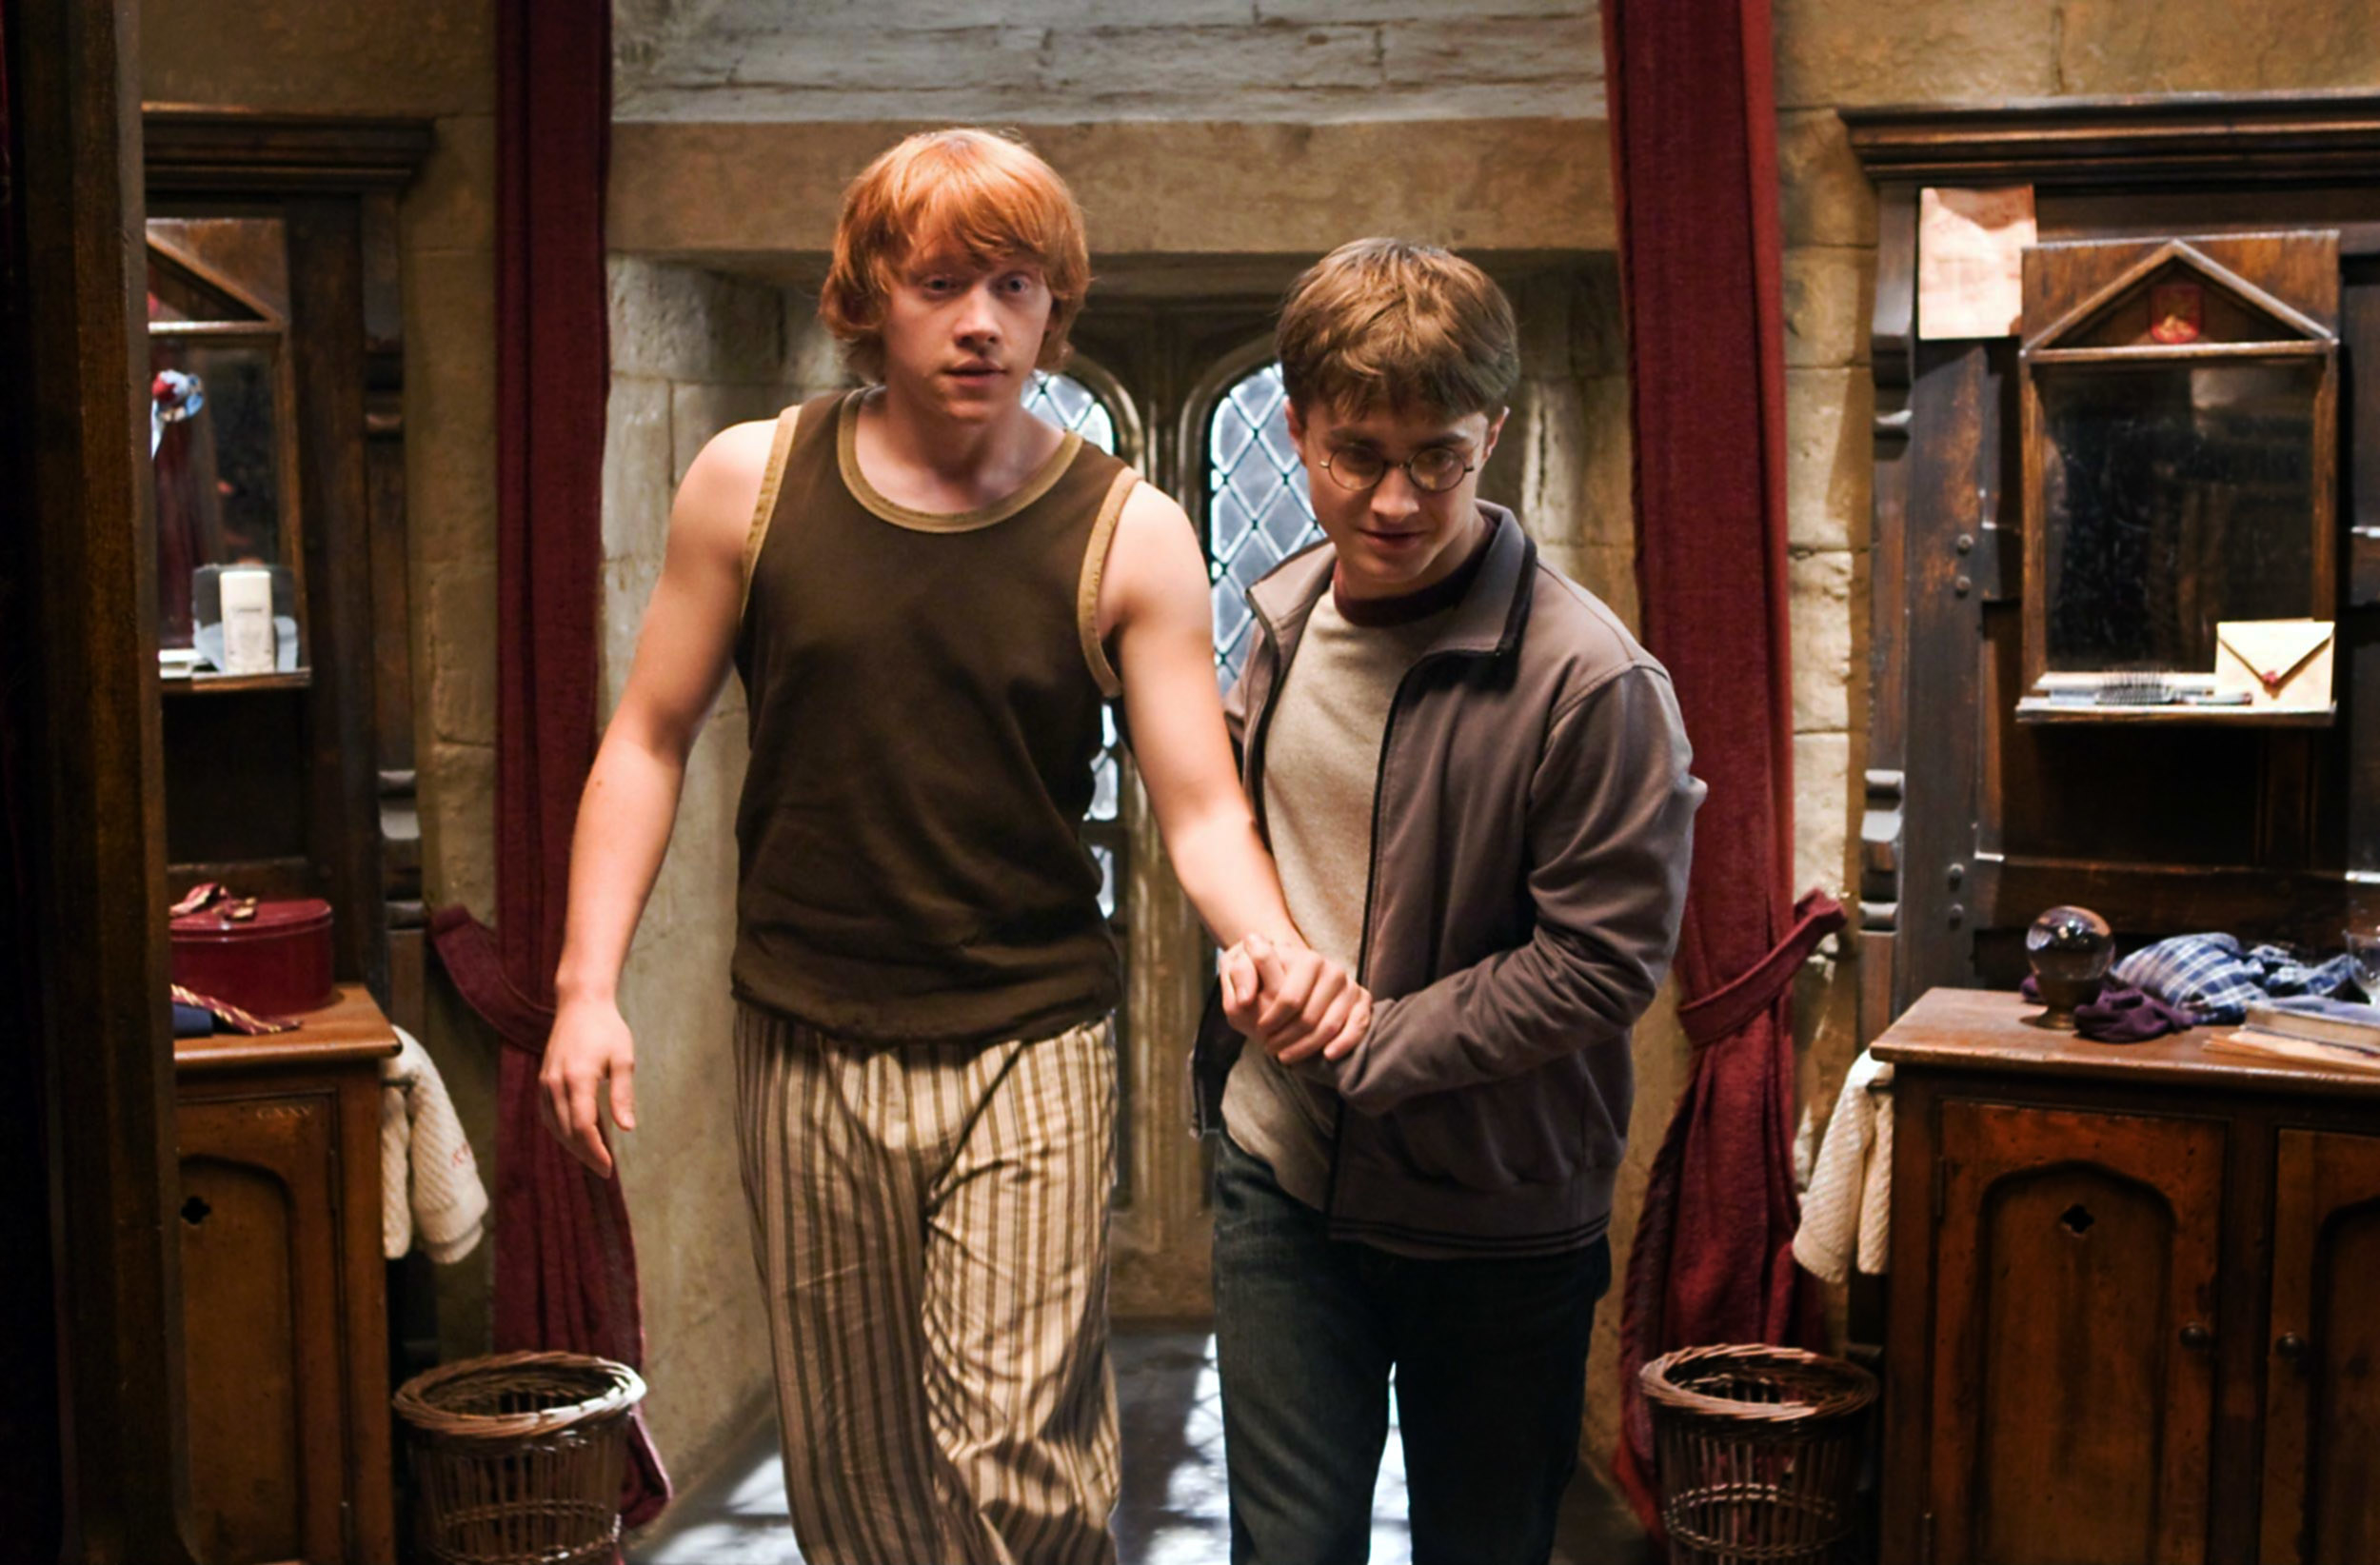 Harry helping Ron walk in the dormitories